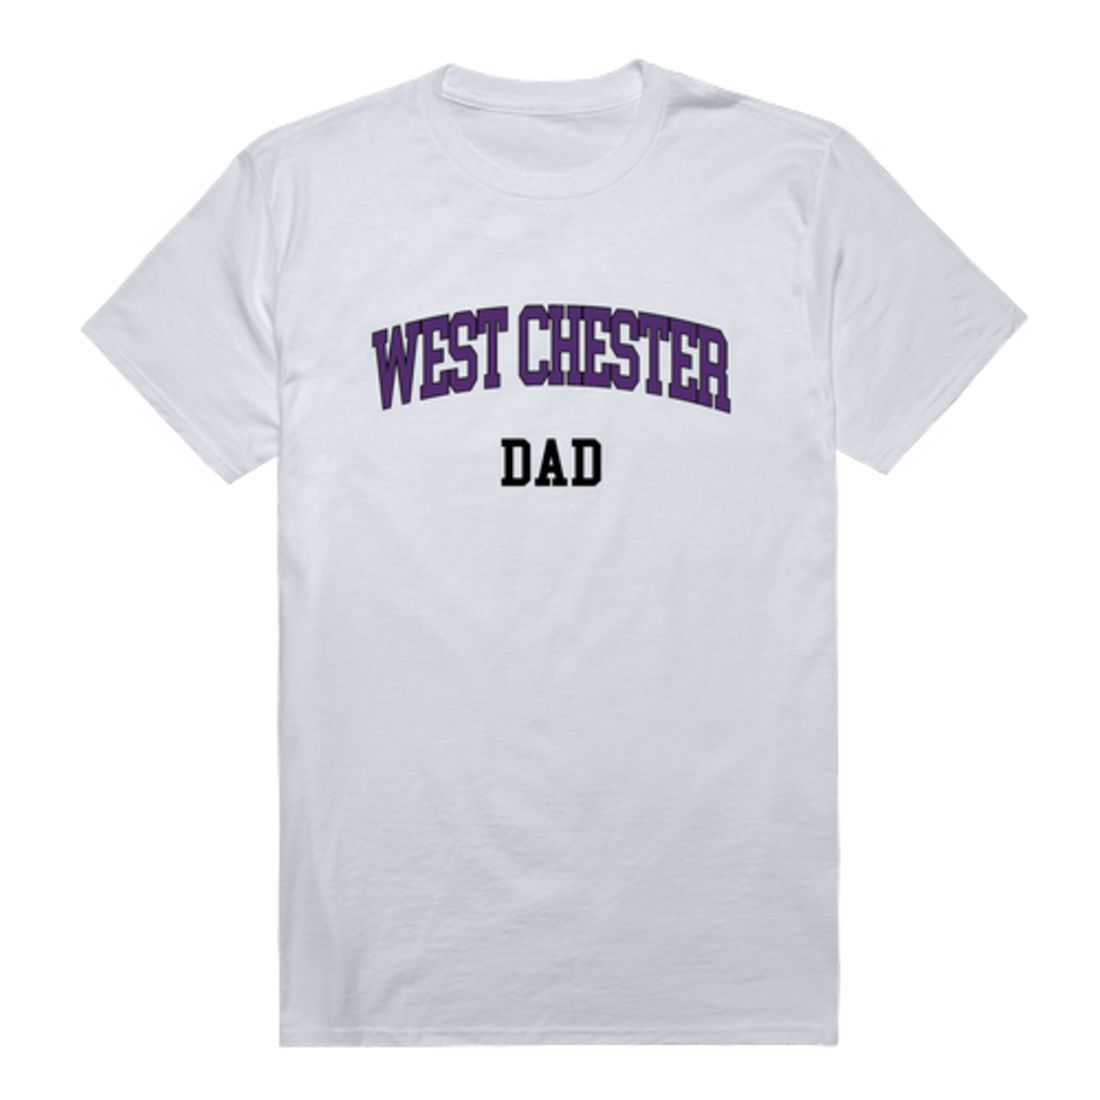 West Chester University Rams Dad T-Shirt